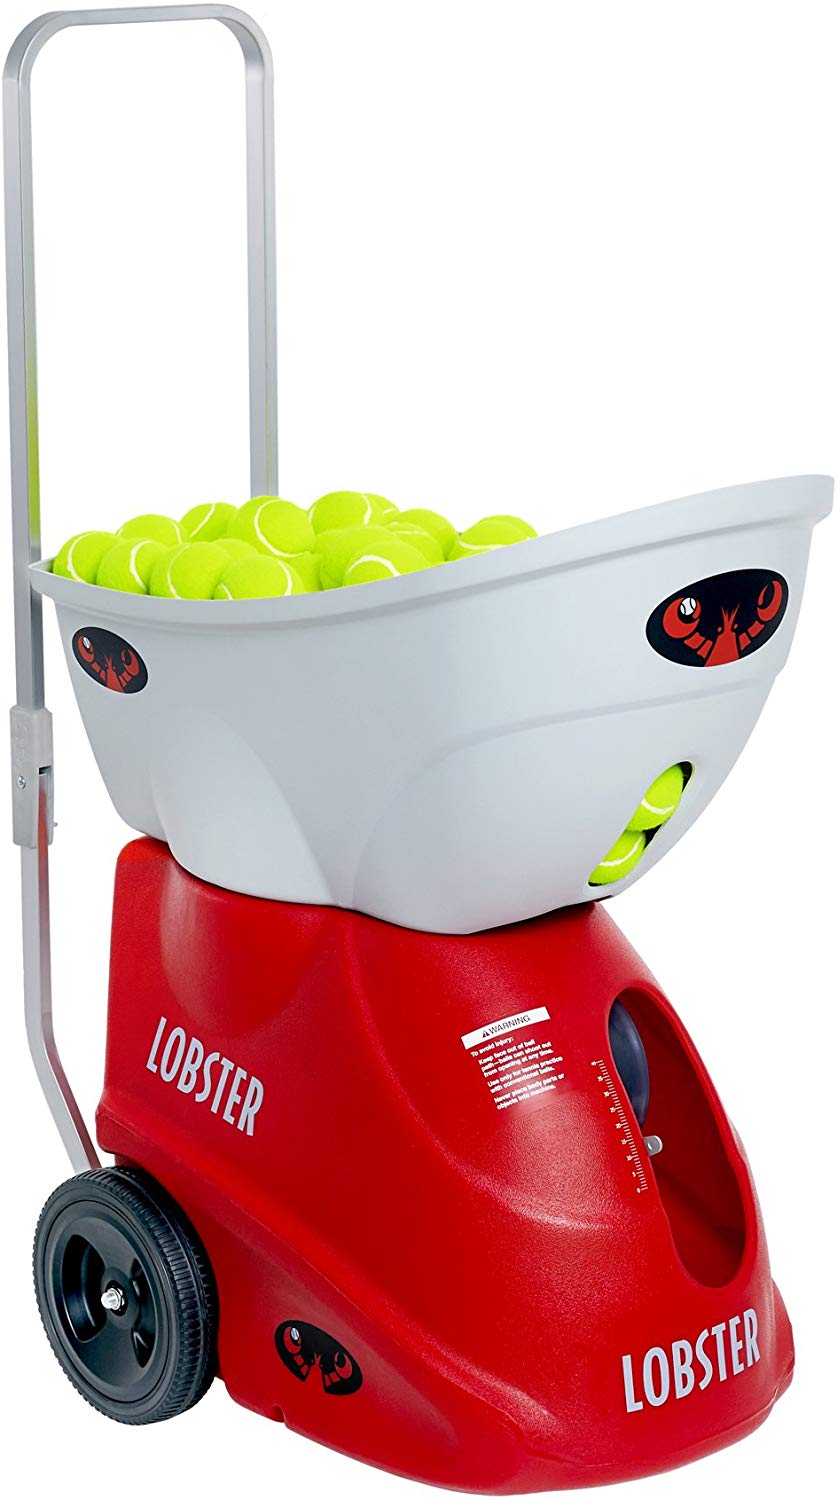 Lobster Sports – Elite Liberty Tennis Ball Machine – Smaller Battery Operated